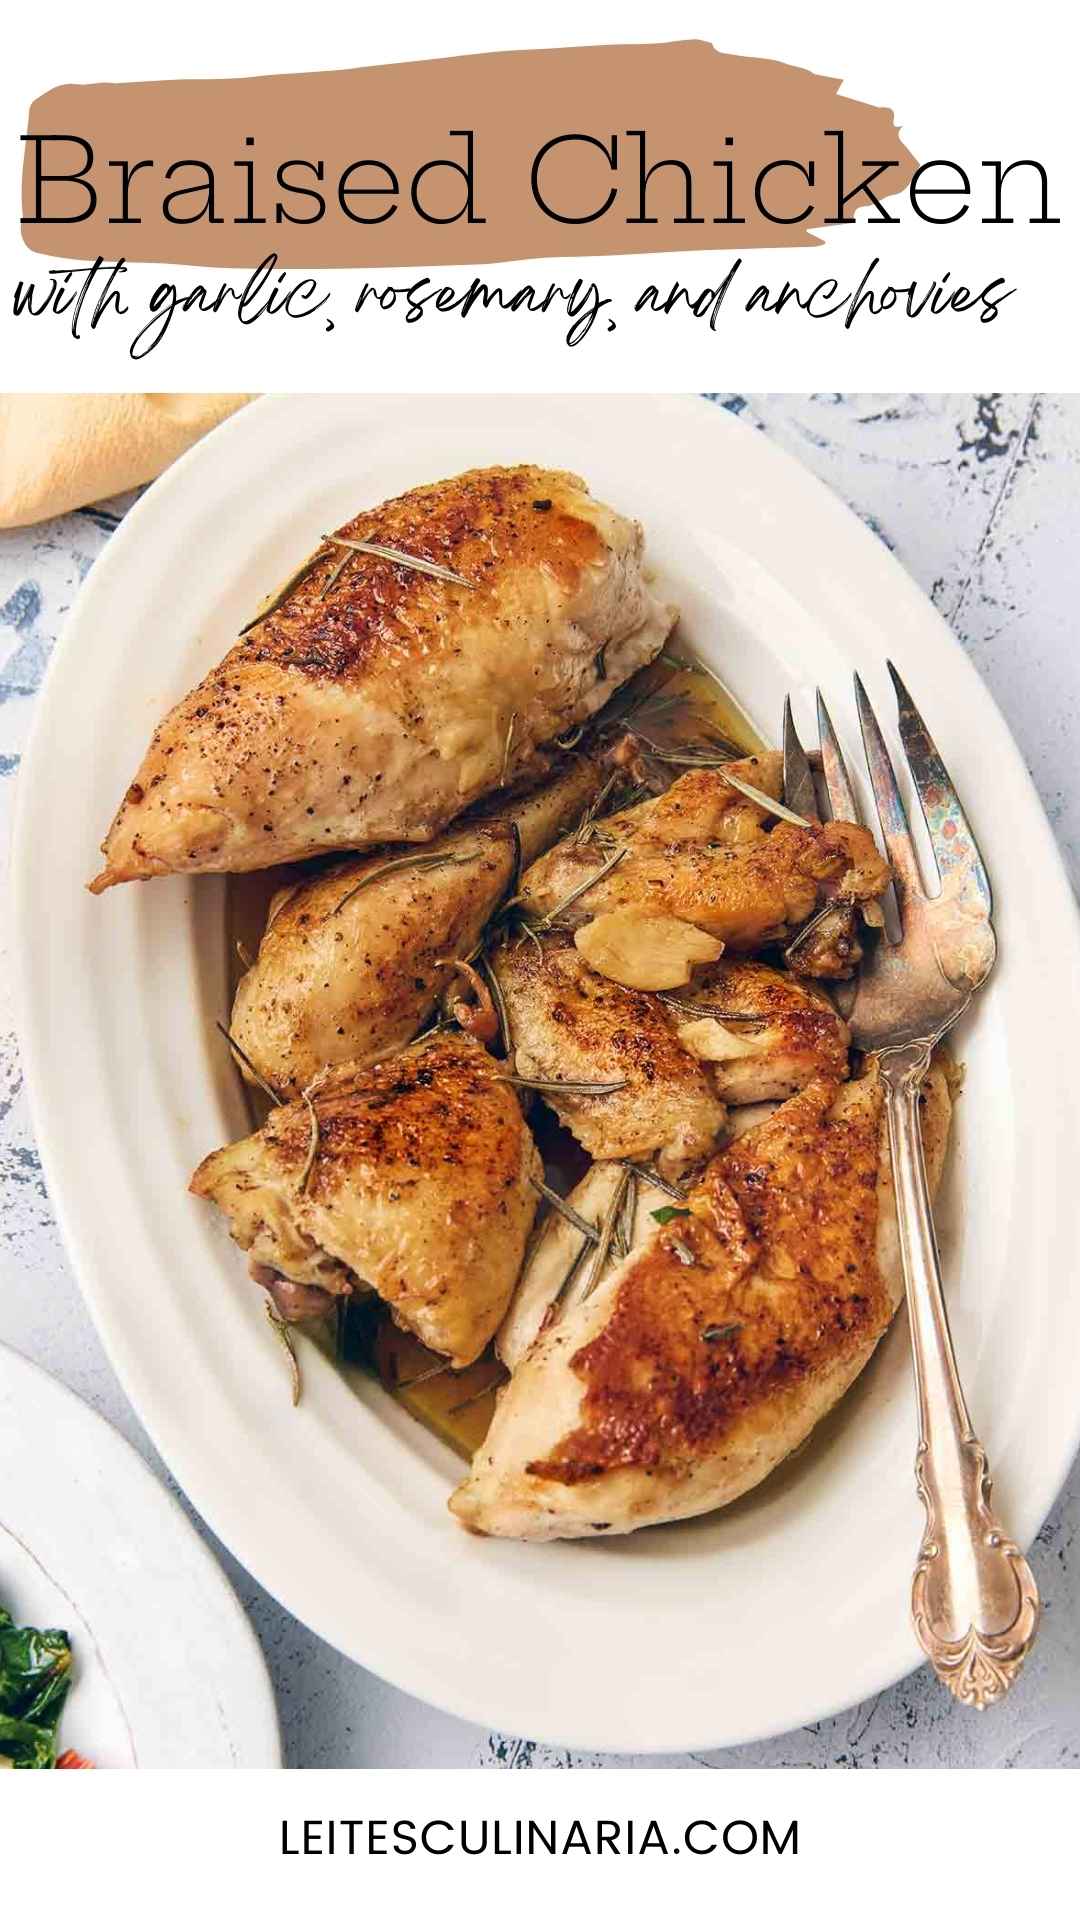 Pieces of browned chicken topped with garlic and rosemary leaves on a white oval platter.